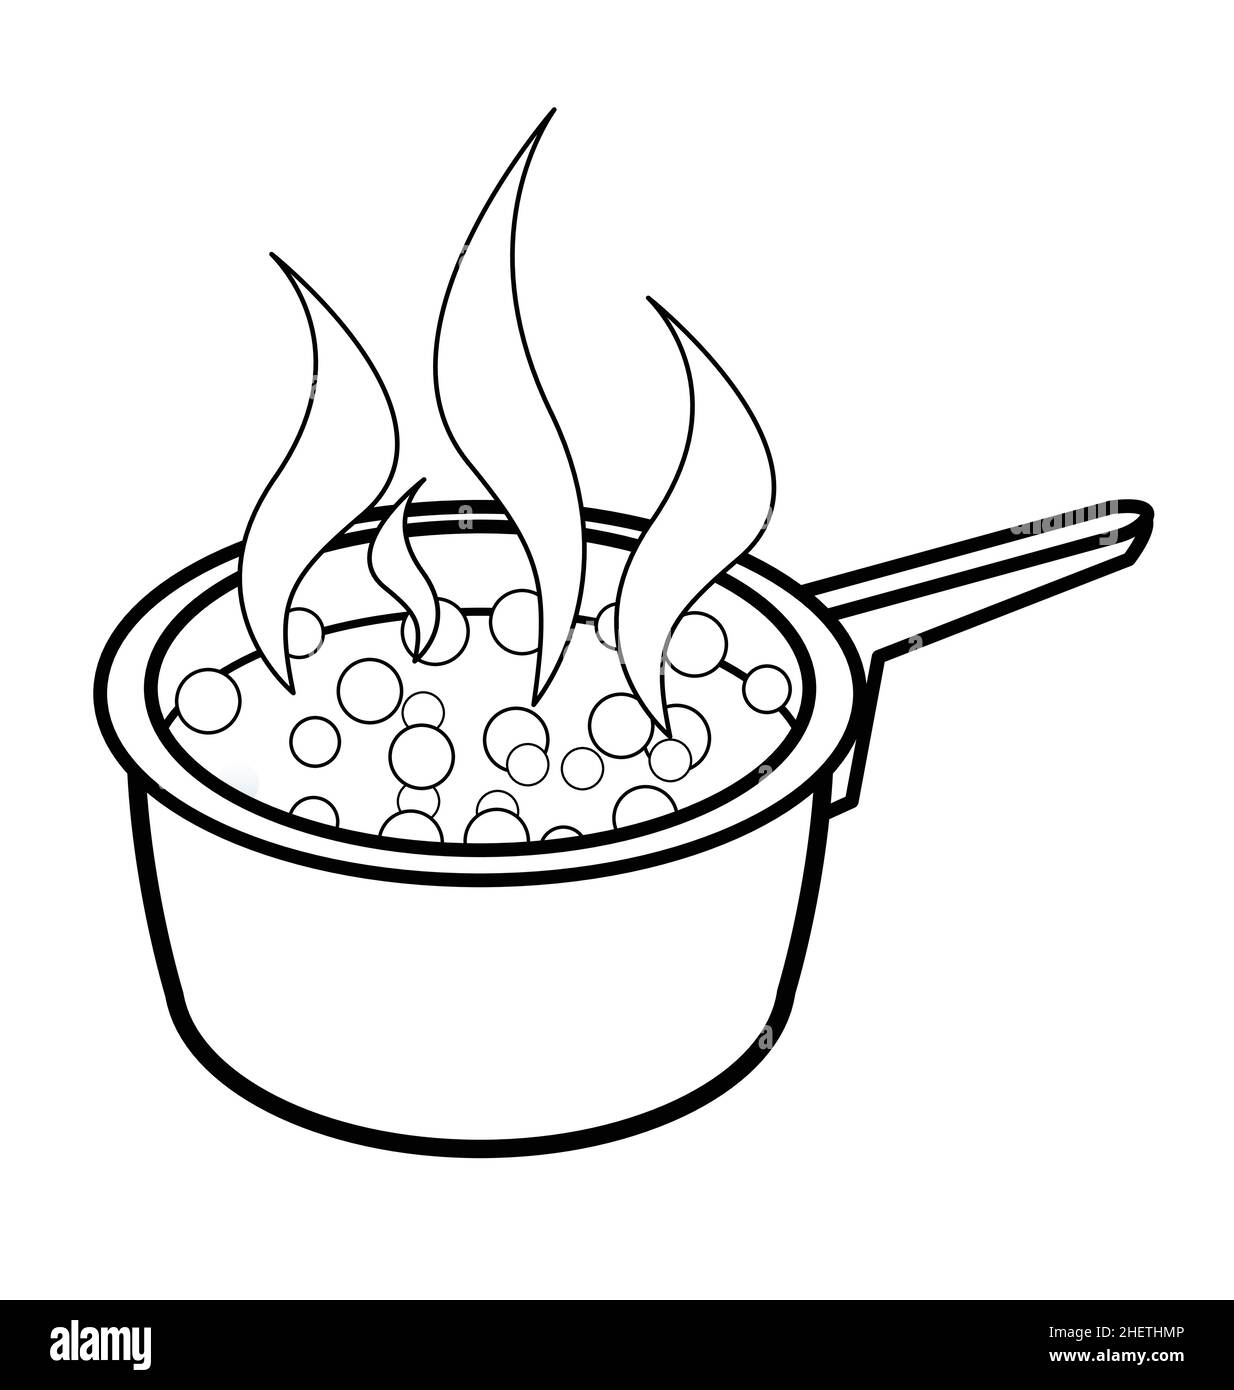 https://c8.alamy.com/comp/2HETHMP/simple-cartoon-pot-with-boiling-water-outline-lineart-icon-vector-isolated-on-white-background-2HETHMP.jpg